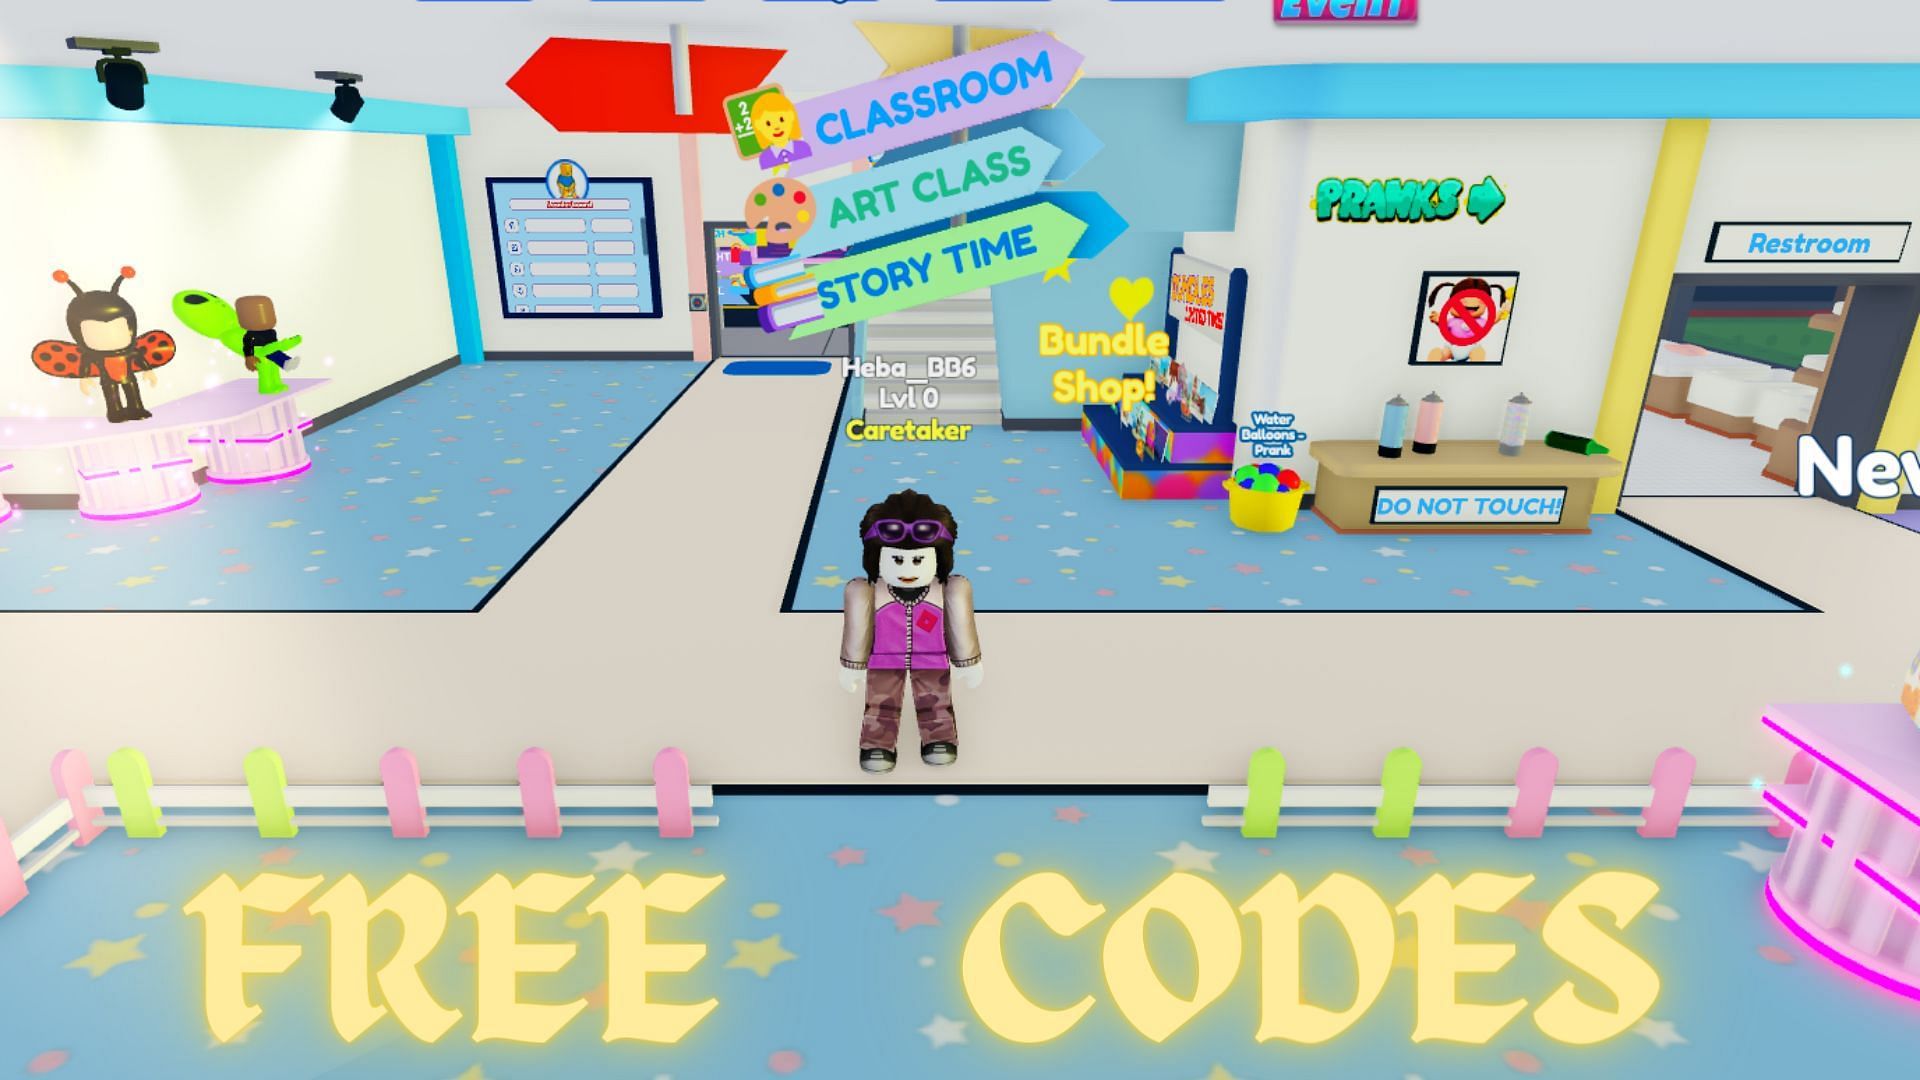 There are many free active codes in Twilight Daycare (Image via Roblox || Sportskeeda)